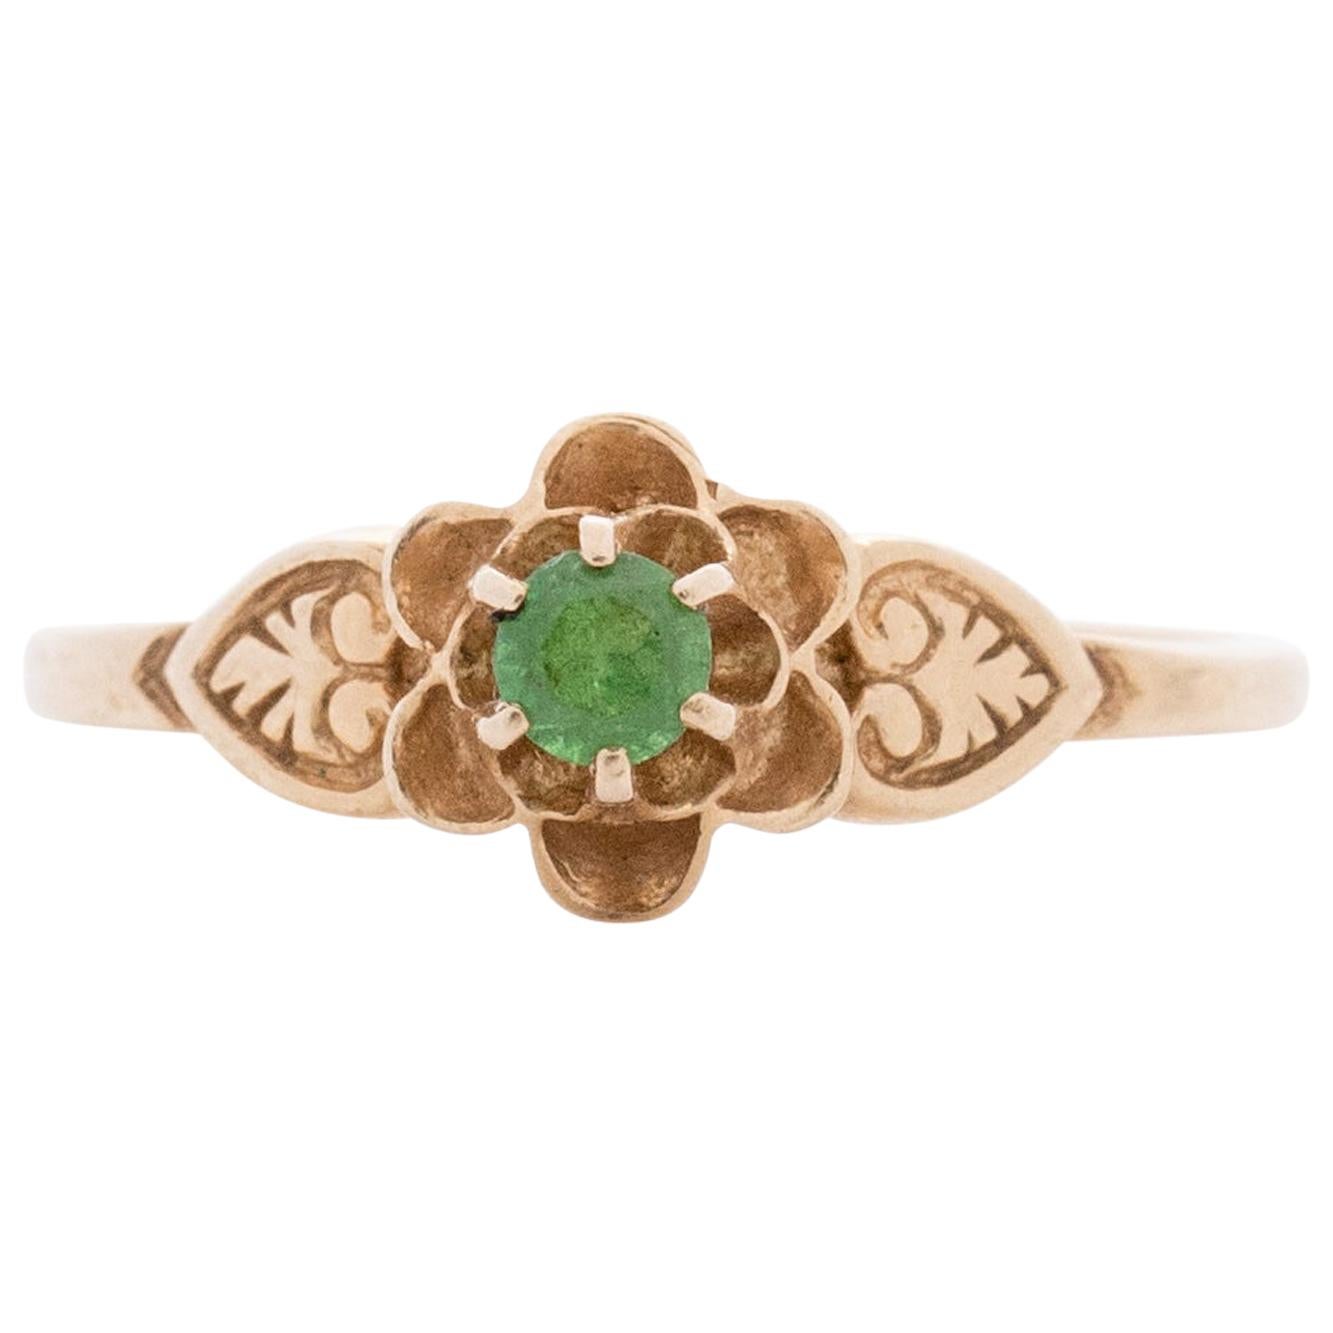 Art Deco 14K Yellow Gold Floral Vintage Ring with Leaf Carving and Emerald Ring